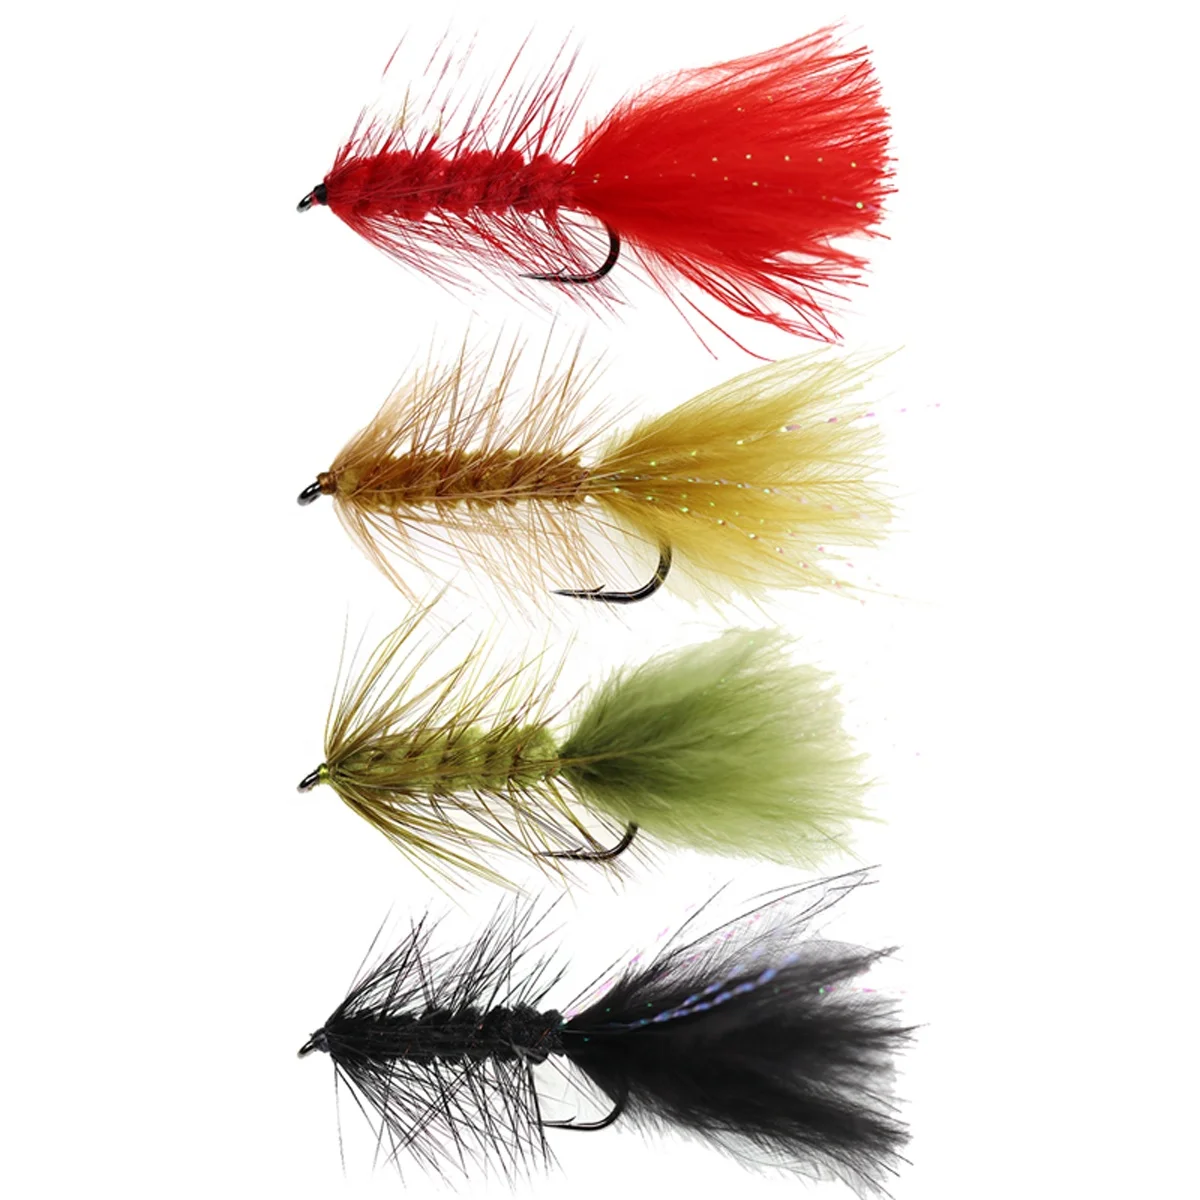 

Wooly Bugger Streamers Fishing Fly Lures Olive Red Black Saltwater Fly Tying Hook Trout Flies Bait, Red, black, olive, white, brown